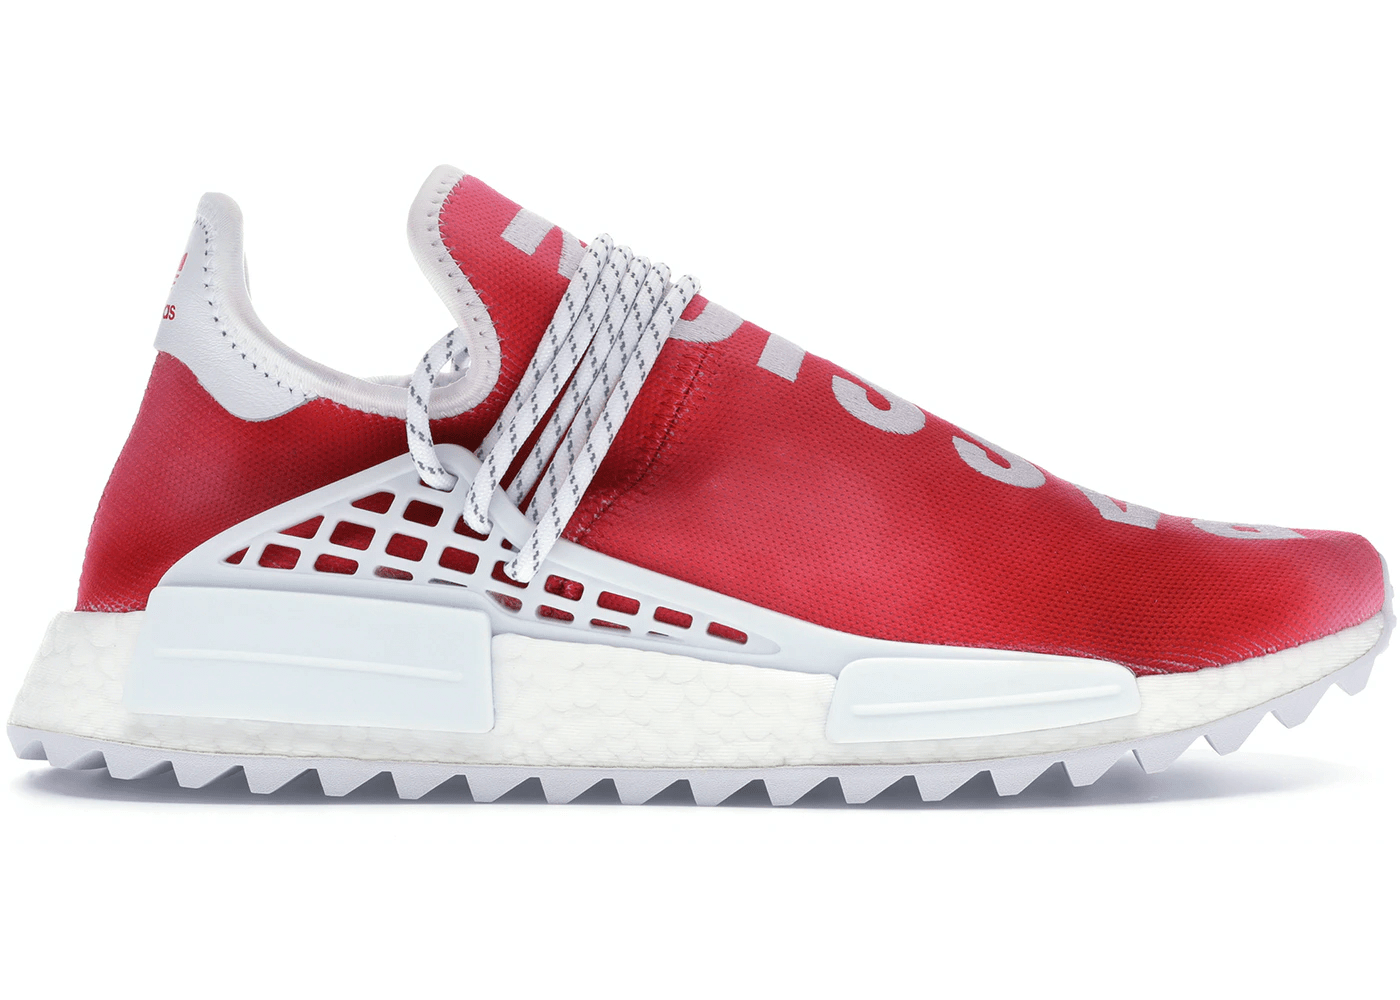 Buy Adidas NMD Humanrace Trail Pharrell Williams Passion, 40% OFF